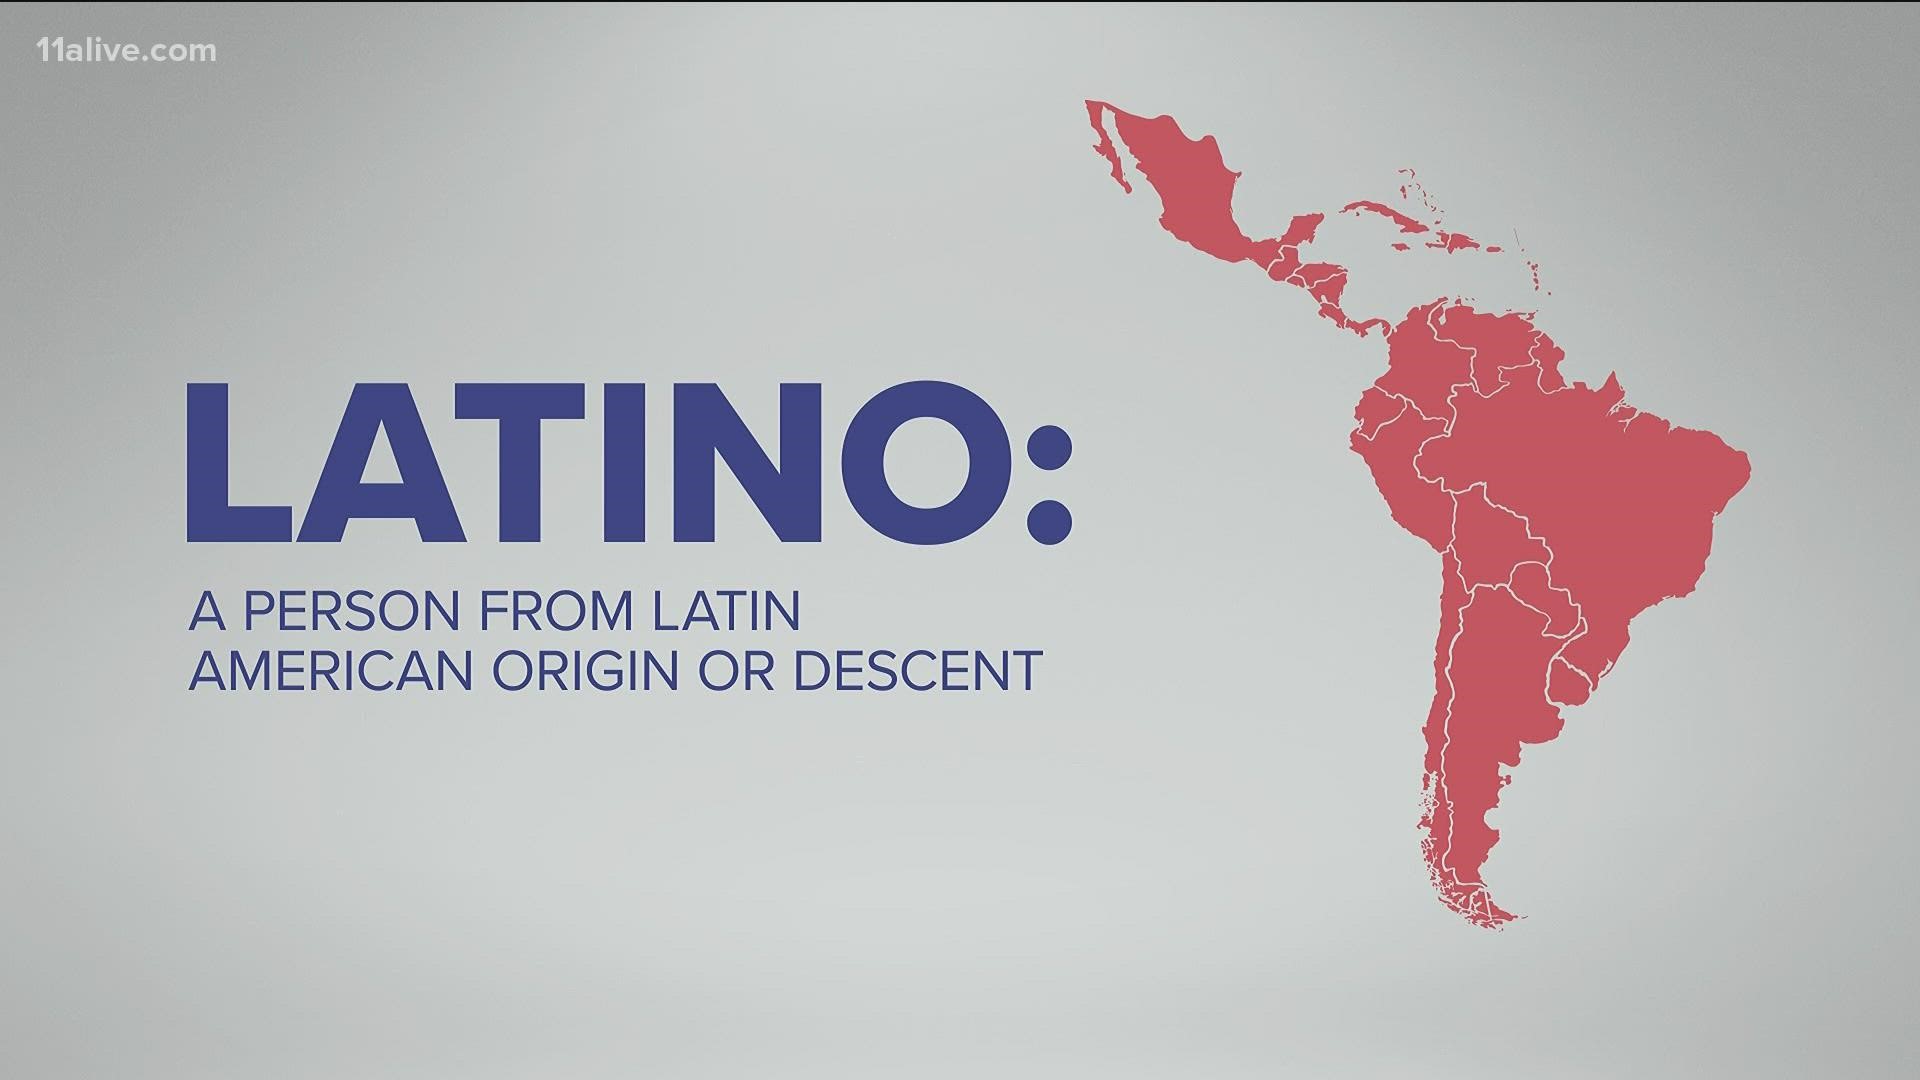 It's National Hispanic Heritage Month. Here's a look at the distinctions between Latino, Latina, and LatinX.